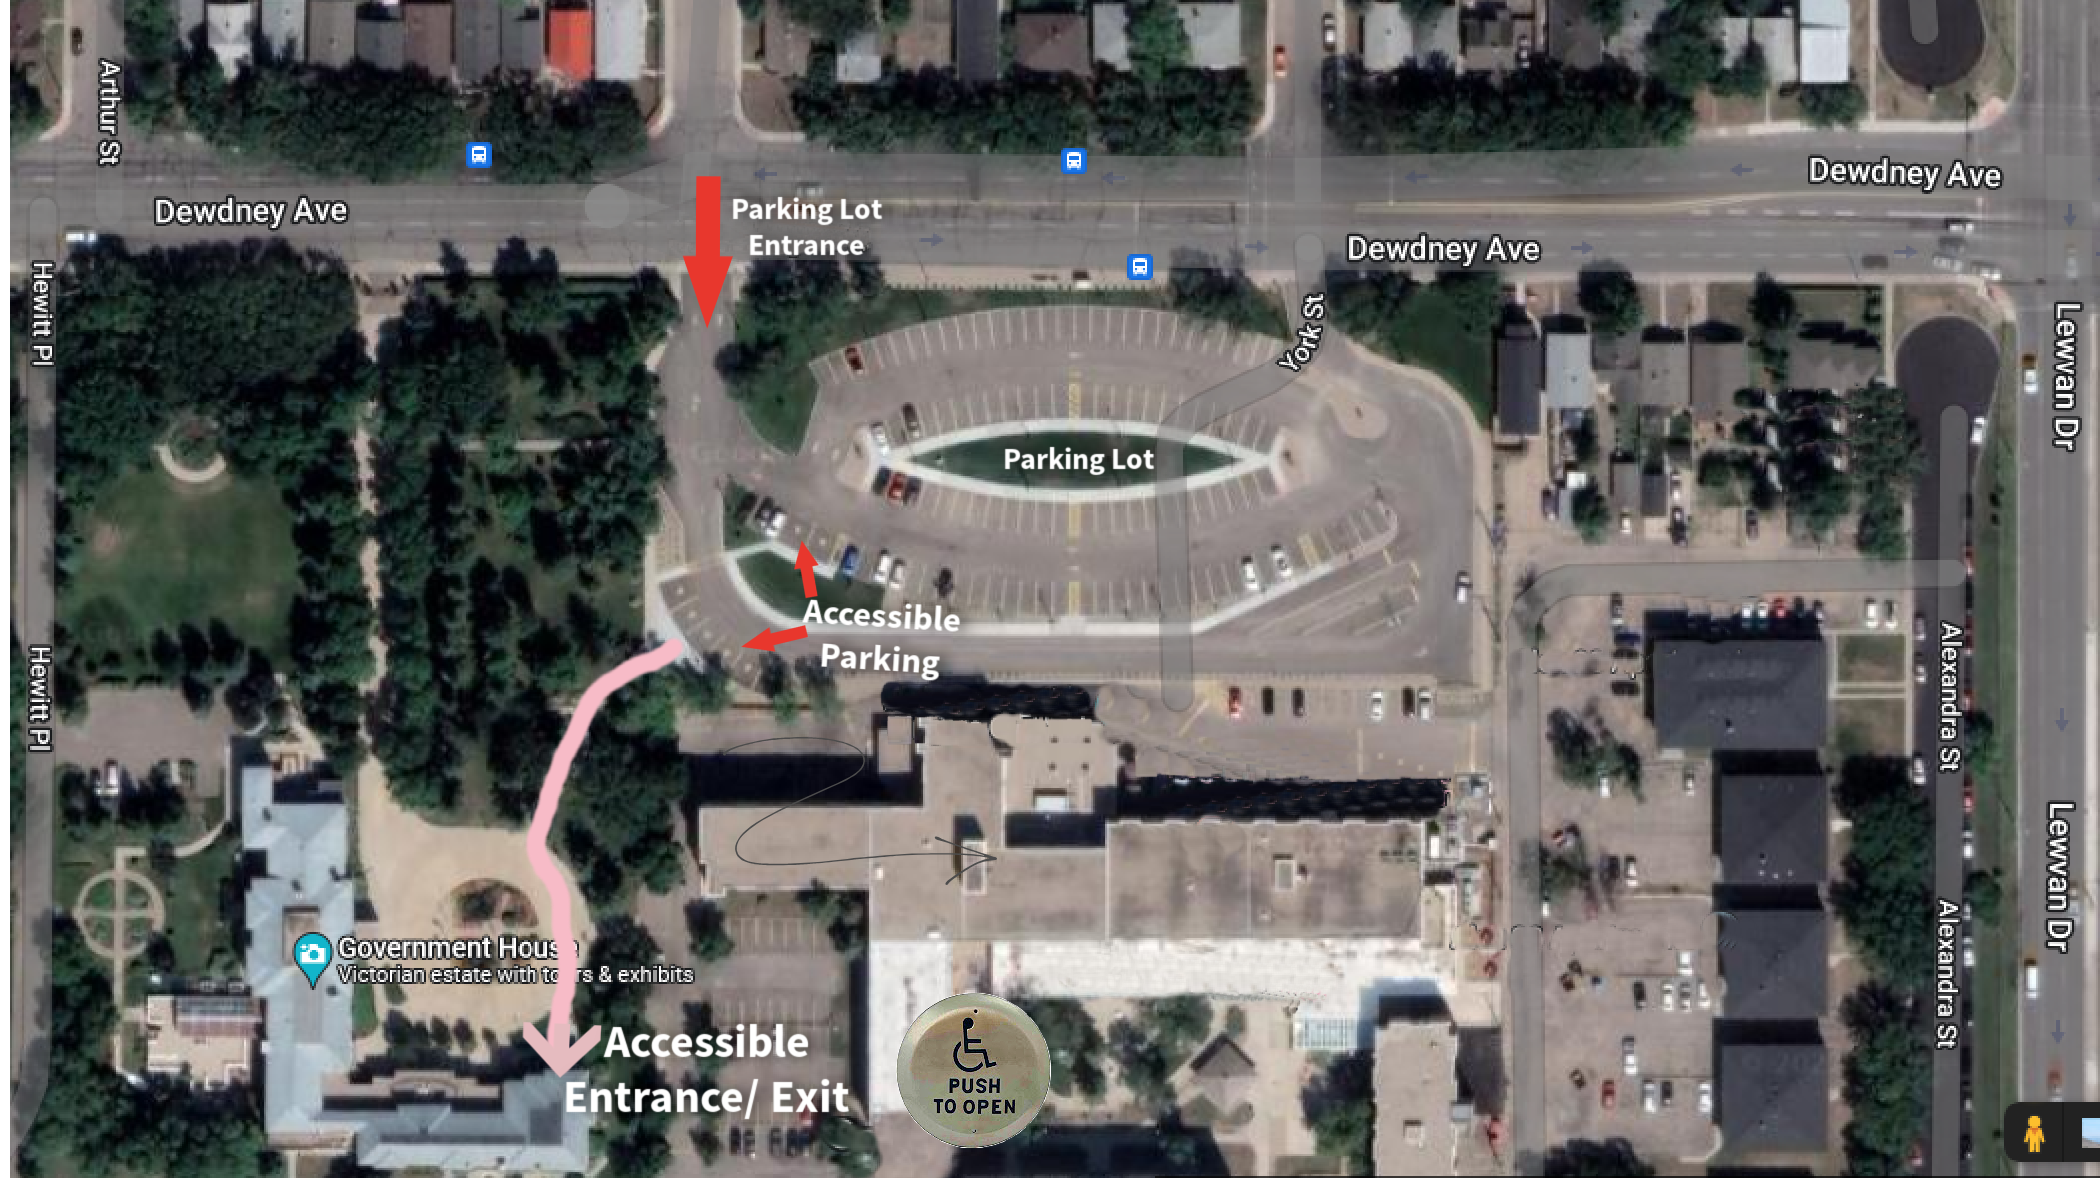 Parking lot map showing full parking lot including accessible parking, accessible pathway to automatic door openers at the entrance to Government House SK